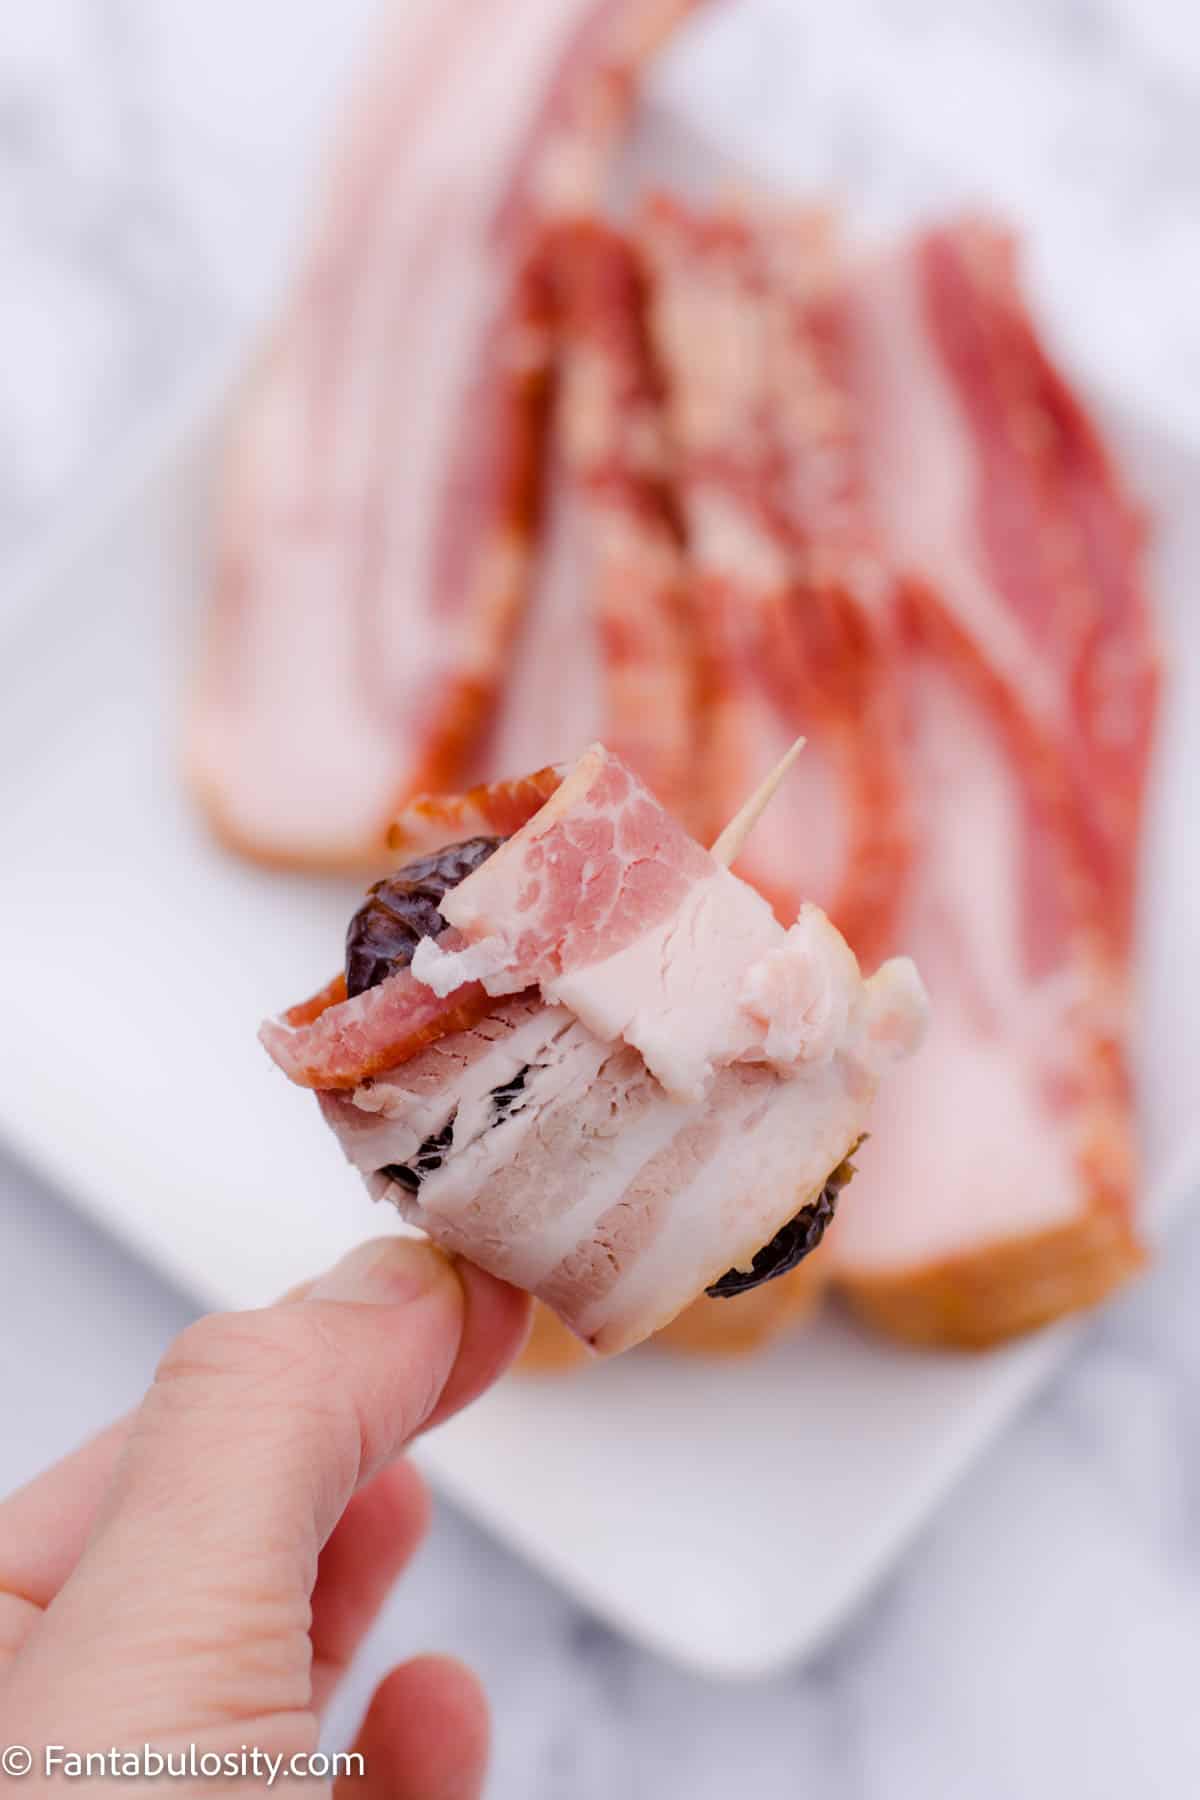 Wrap a half slice of bacon around your stuffed date and secure it with a toothpick.